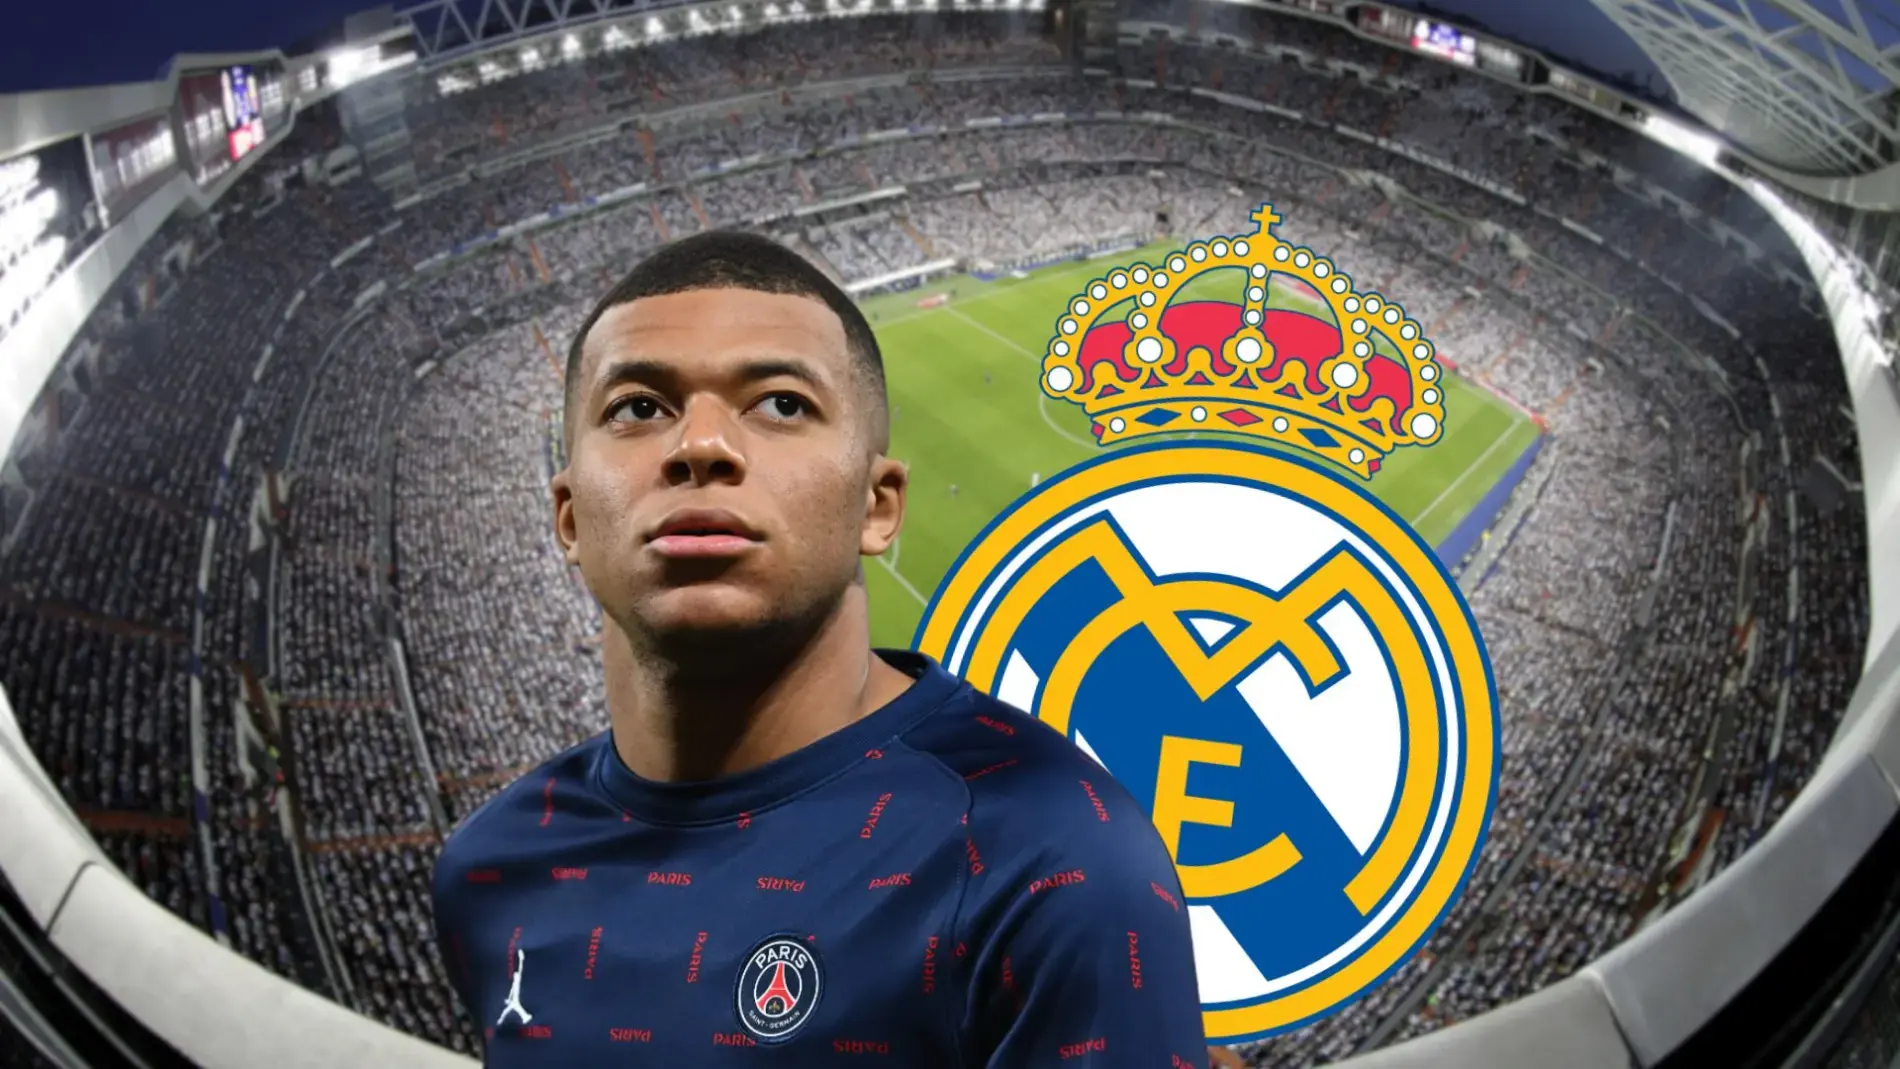 Mbappé's world exclusive announces the date of his transfer to Real Madrid
	

